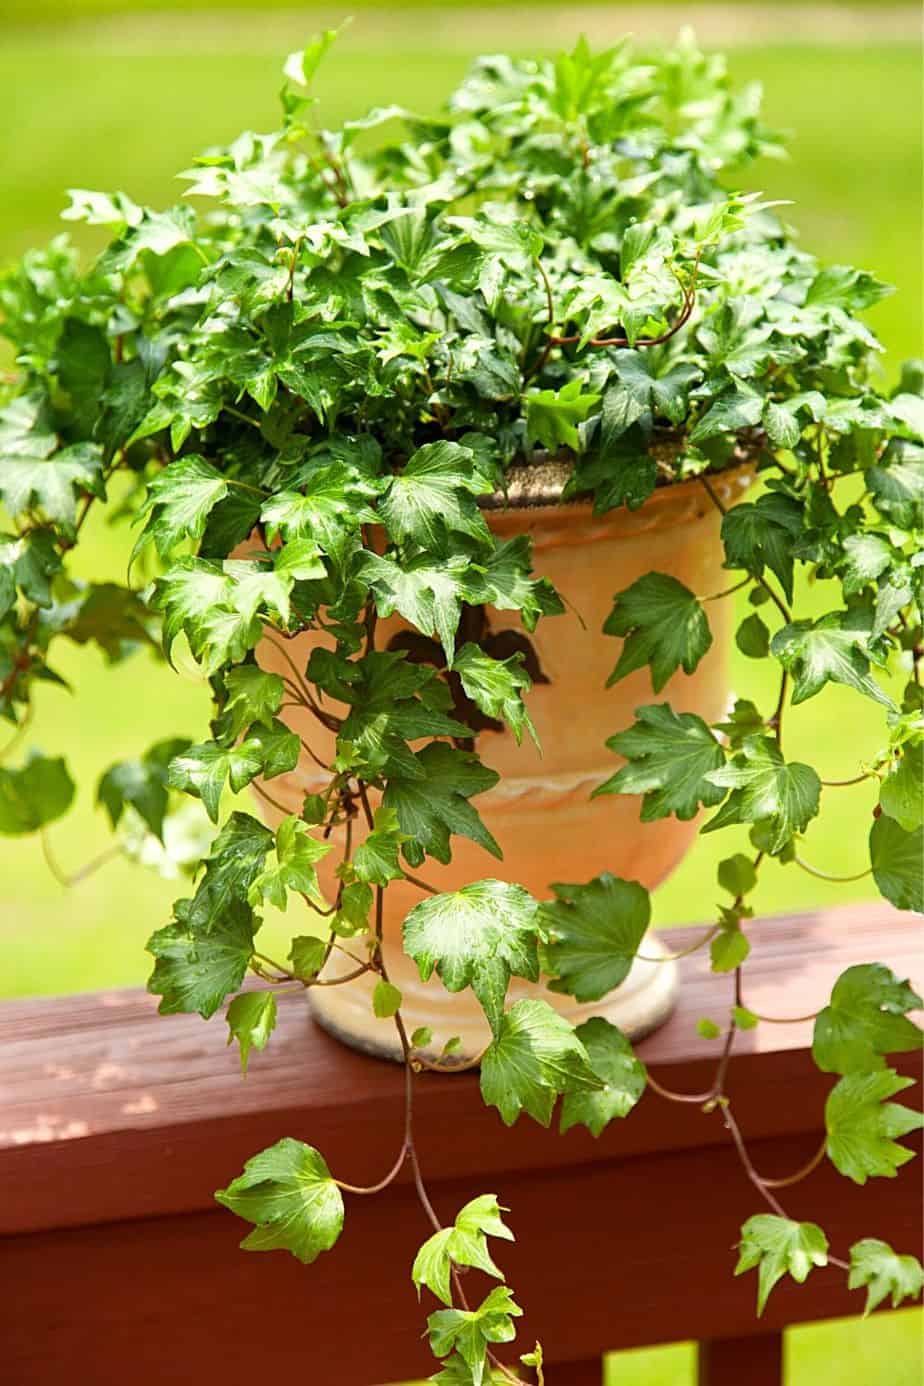 English Ivy, though you can place it on your north facing balcony, should be kept away from children as it's a toxic plant